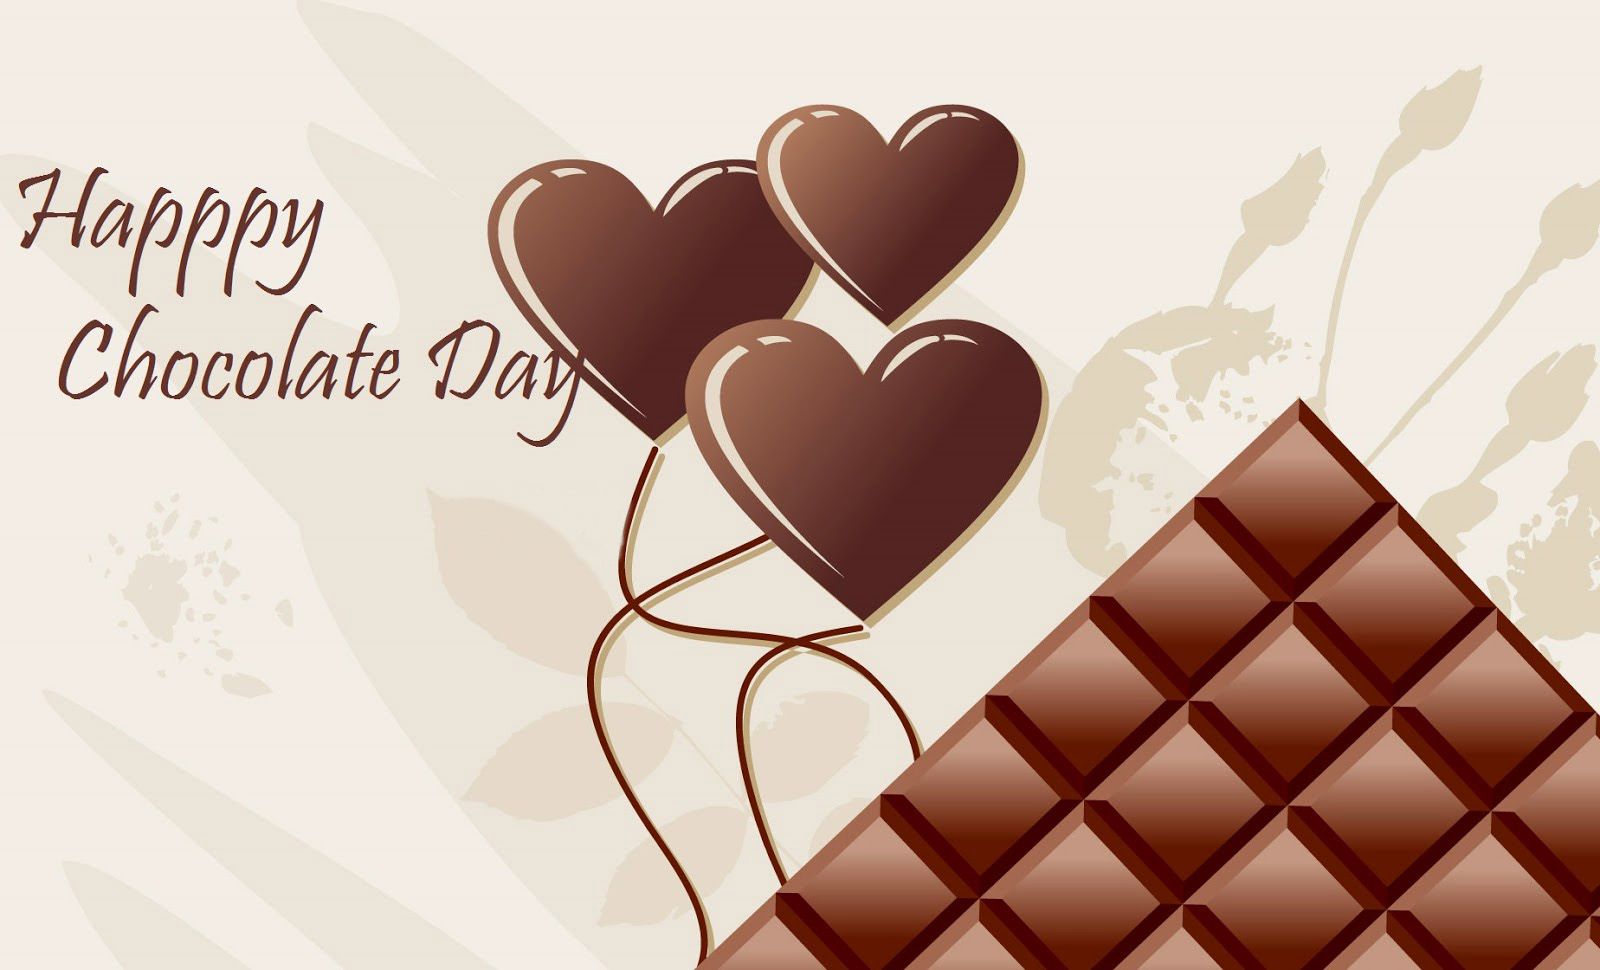 Chocolate Day Wallpapers for Mobile & Desktop | CGfrog